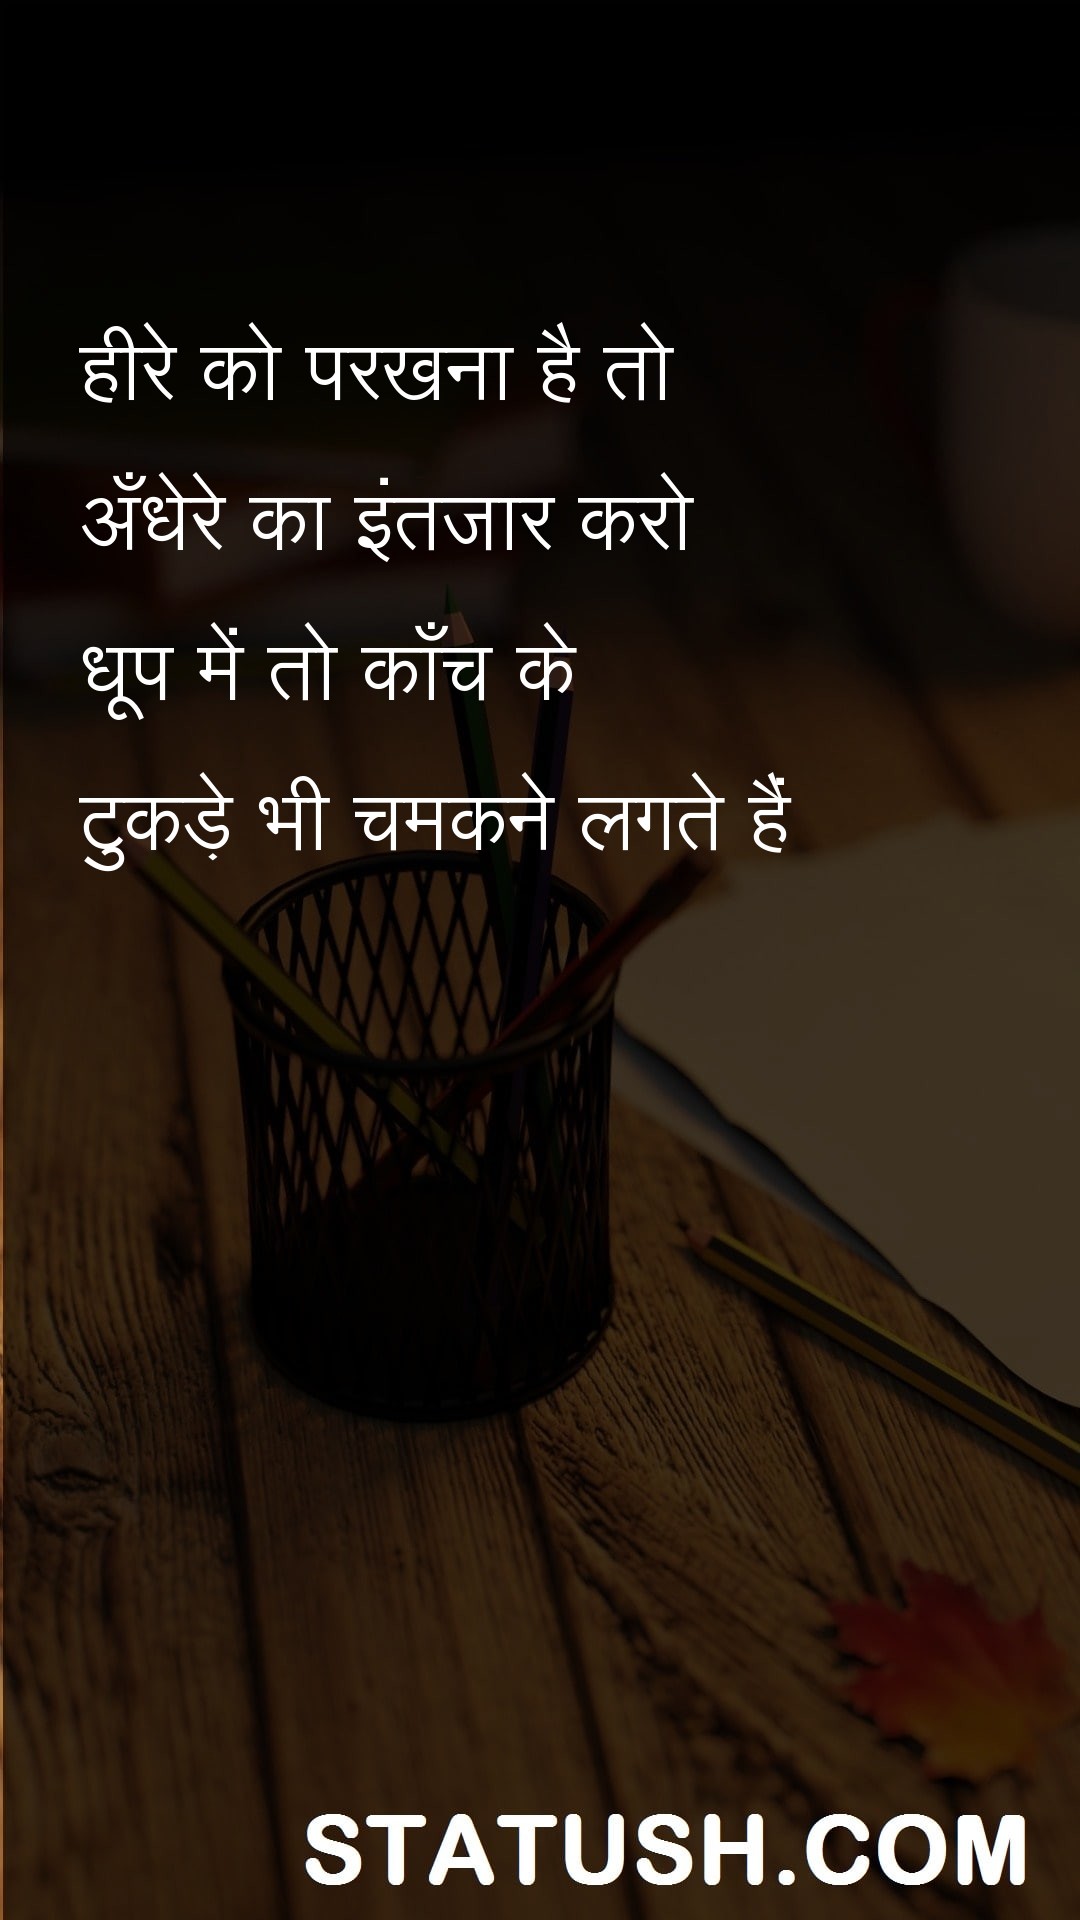 If you want to test the diamond Hindi Quotes at statush.com